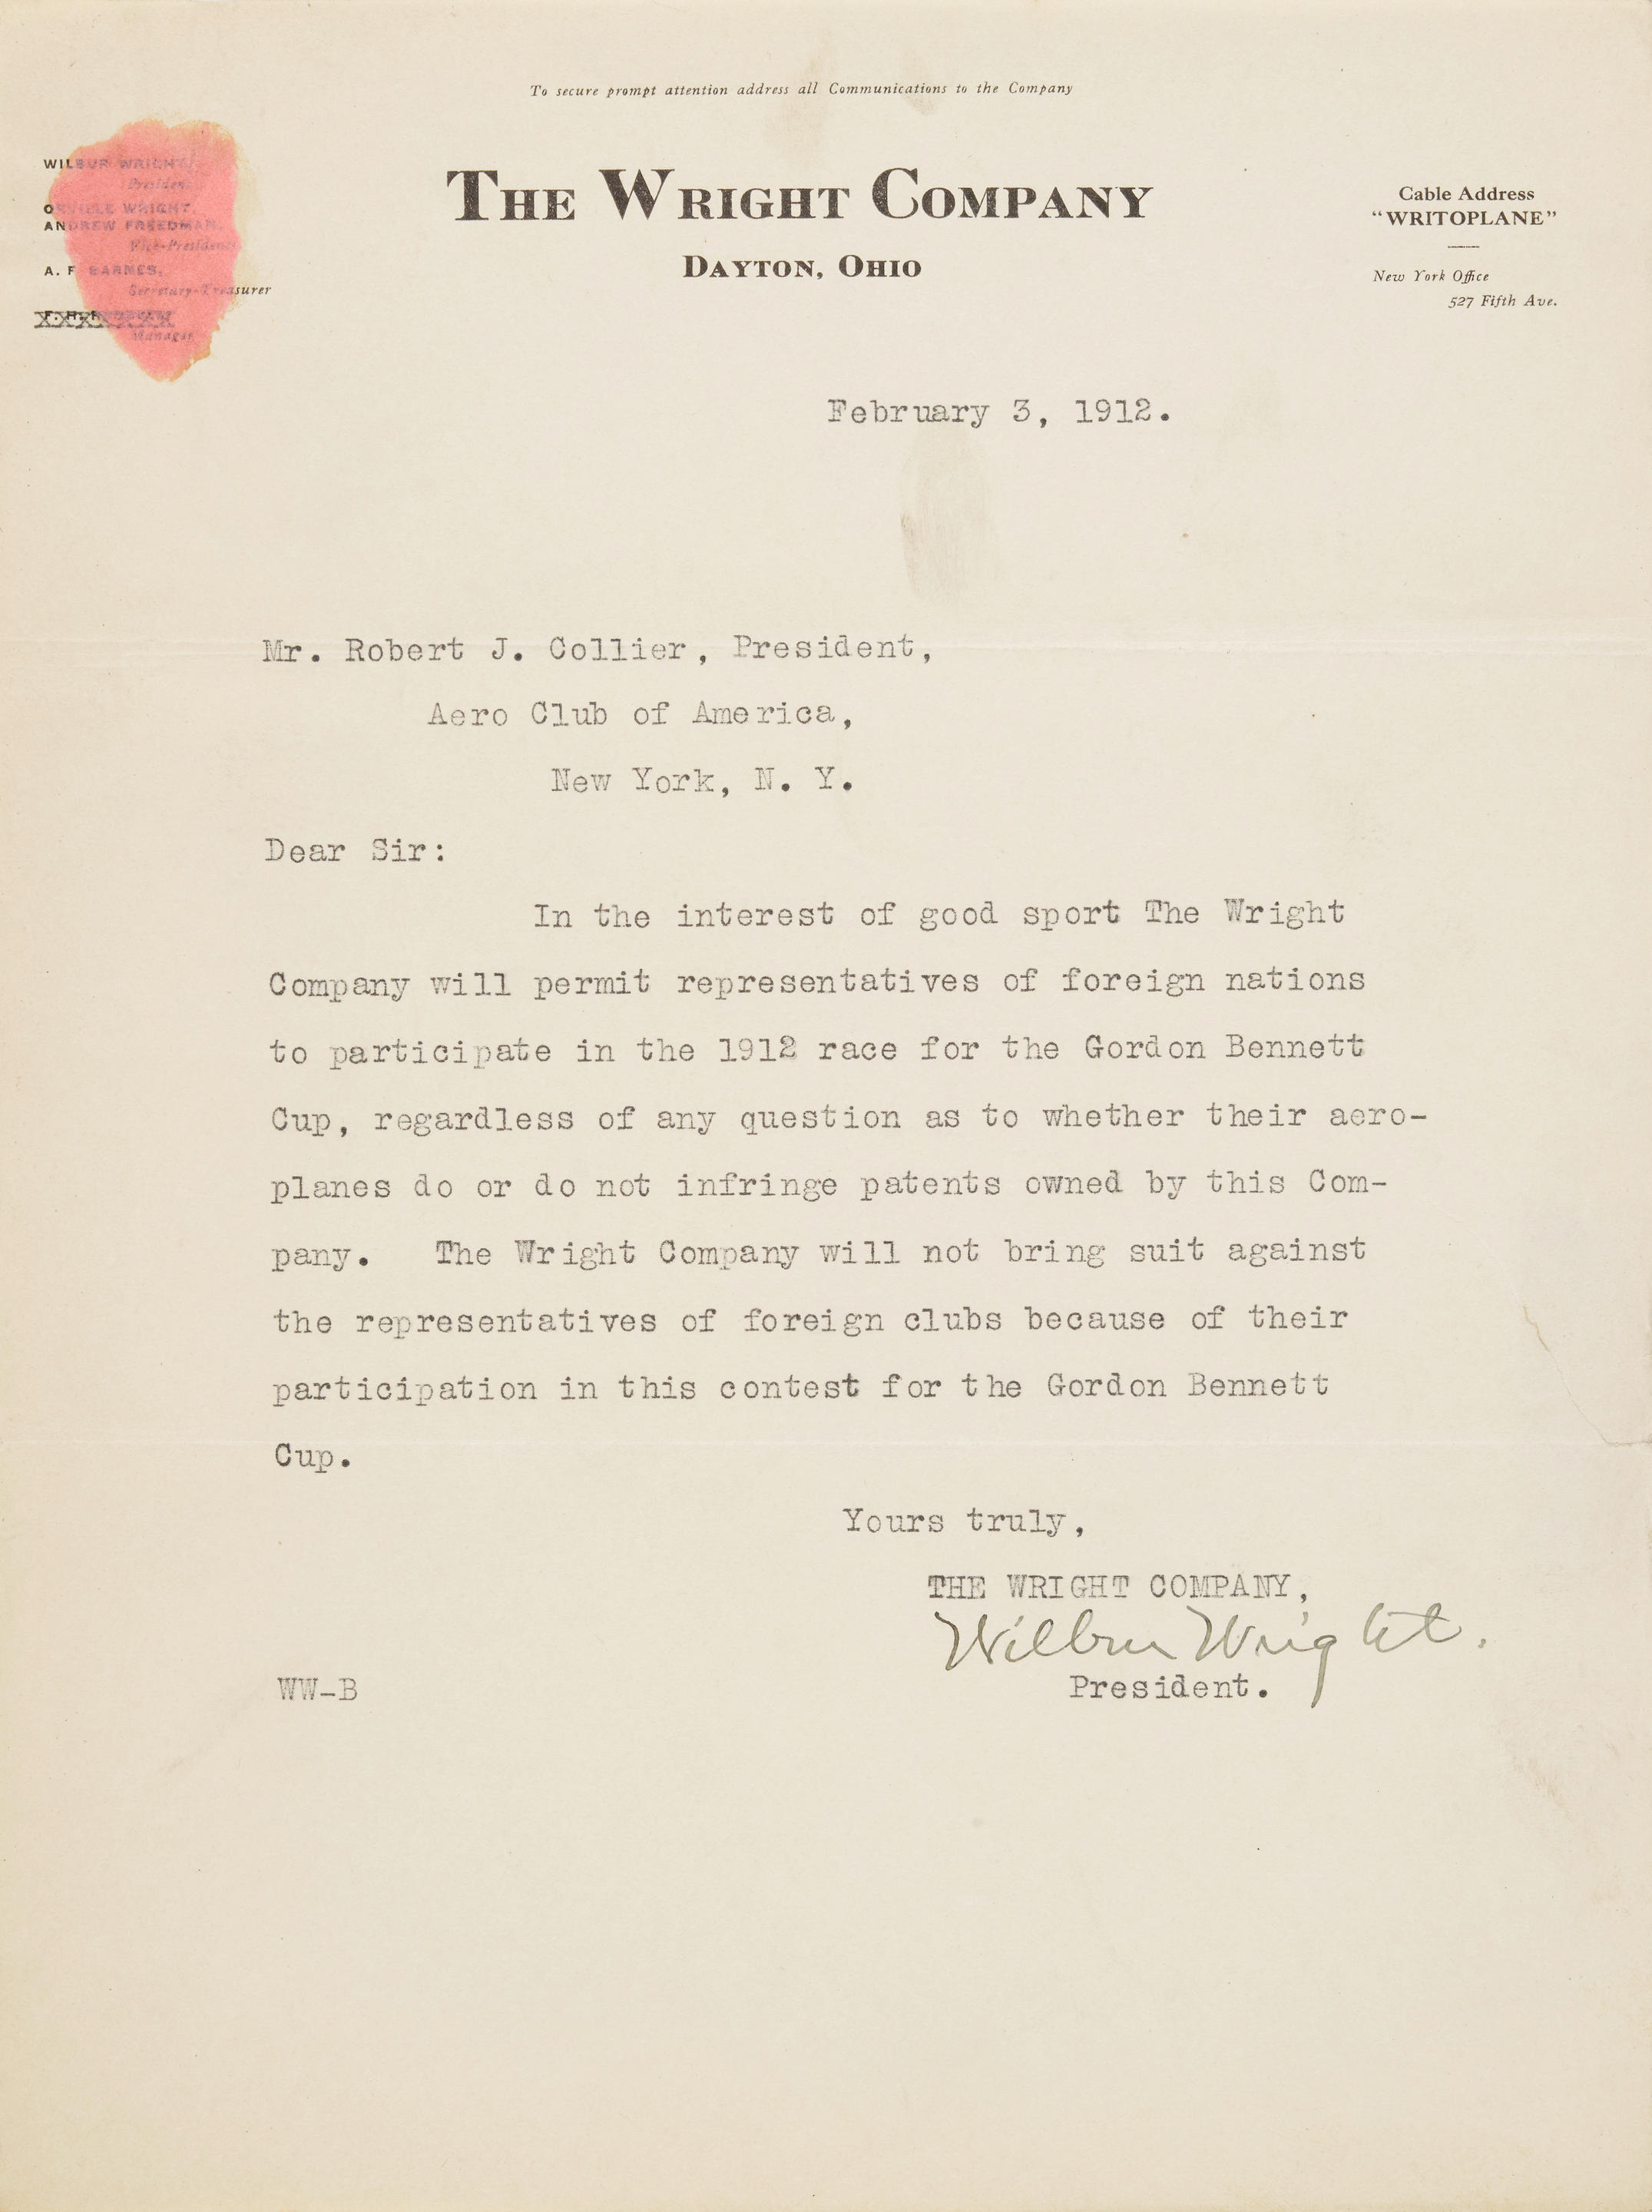 WILBUR WRIGHT ASSURES ROBERT COLLIER HE WILL NOT INTERFERE WITH THE GORDON...